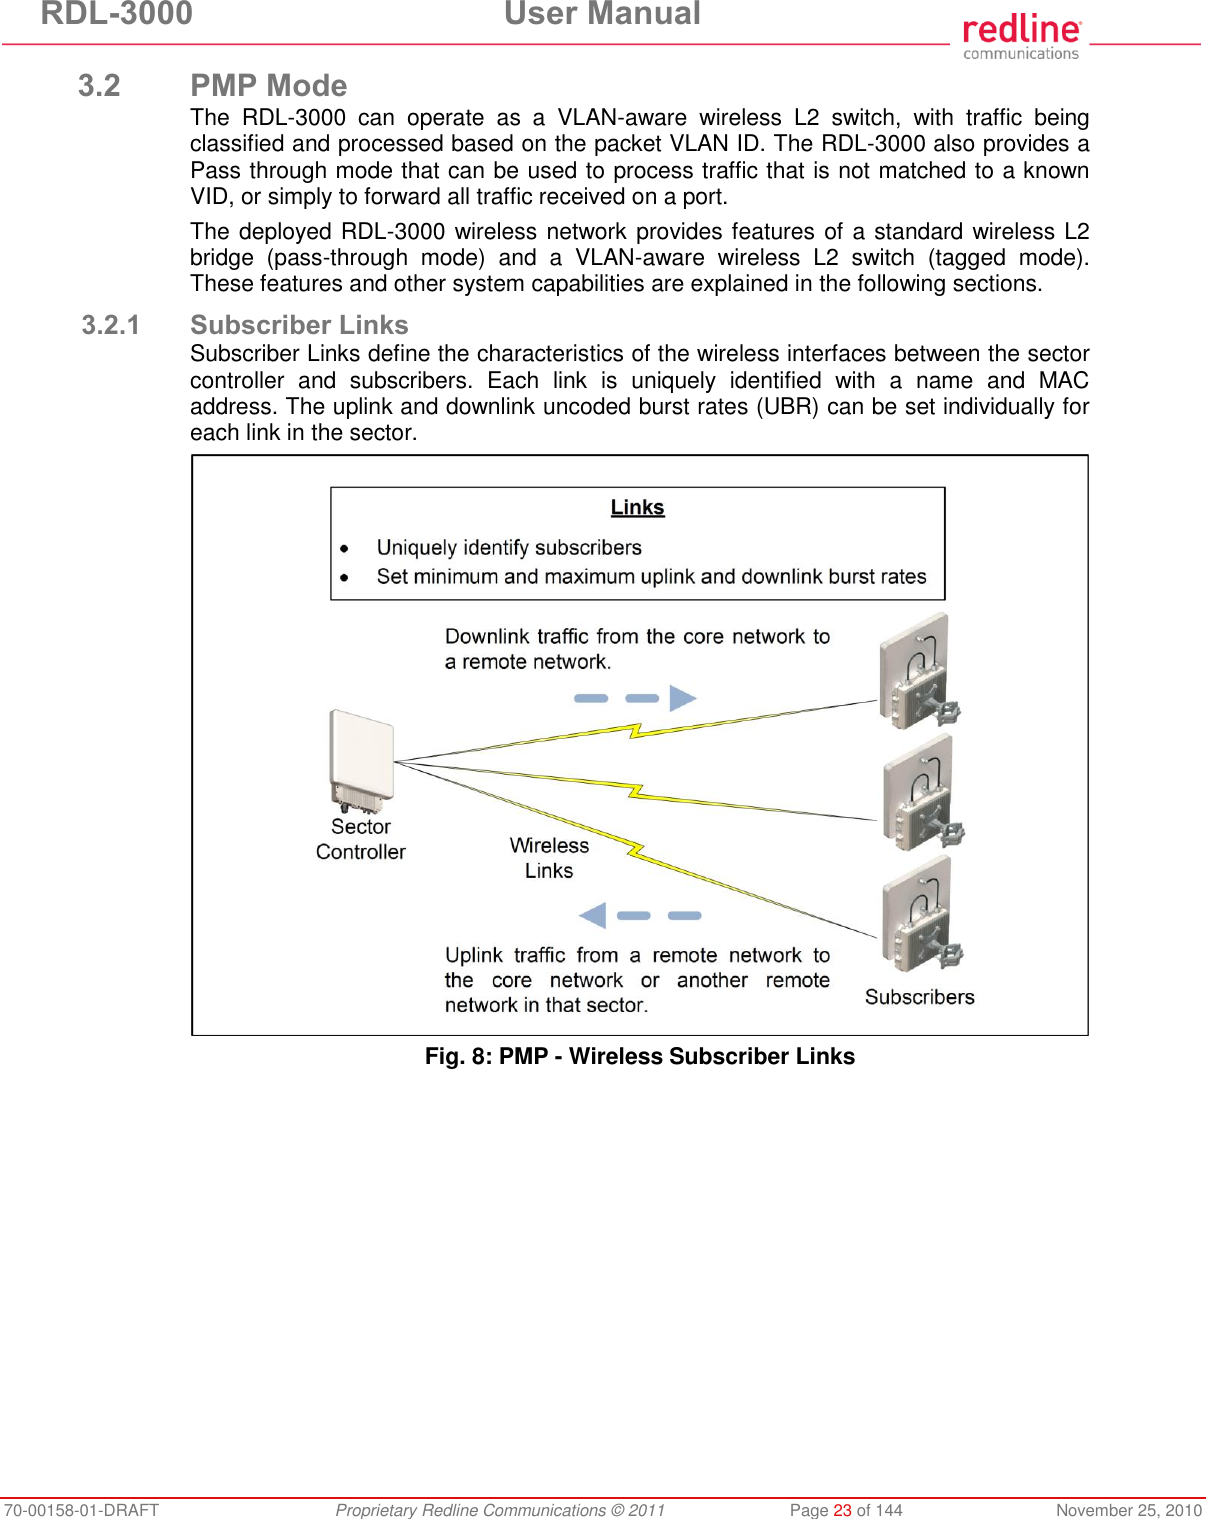 RDL-3000  User Manual 70-00158-01-DRAFT  Proprietary Redline Communications © 2011  Page 23 of 144  November 25, 2010 3.2 PMP Mode The  RDL-3000  can  operate  as  a  VLAN-aware  wireless  L2  switch,  with  traffic  being classified and processed based on the packet VLAN ID. The RDL-3000 also provides a Pass through mode that can be used to process traffic that is not matched to a known VID, or simply to forward all traffic received on a port.  The deployed RDL-3000 wireless network provides features of a standard wireless L2 bridge  (pass-through  mode)  and  a  VLAN-aware  wireless  L2  switch  (tagged  mode). These features and other system capabilities are explained in the following sections. 3.2.1 Subscriber Links Subscriber Links define the characteristics of the wireless interfaces between the sector controller  and  subscribers.  Each  link  is  uniquely  identified  with  a  name  and  MAC address. The uplink and downlink uncoded burst rates (UBR) can be set individually for each link in the sector.  Fig. 8: PMP - Wireless Subscriber Links 